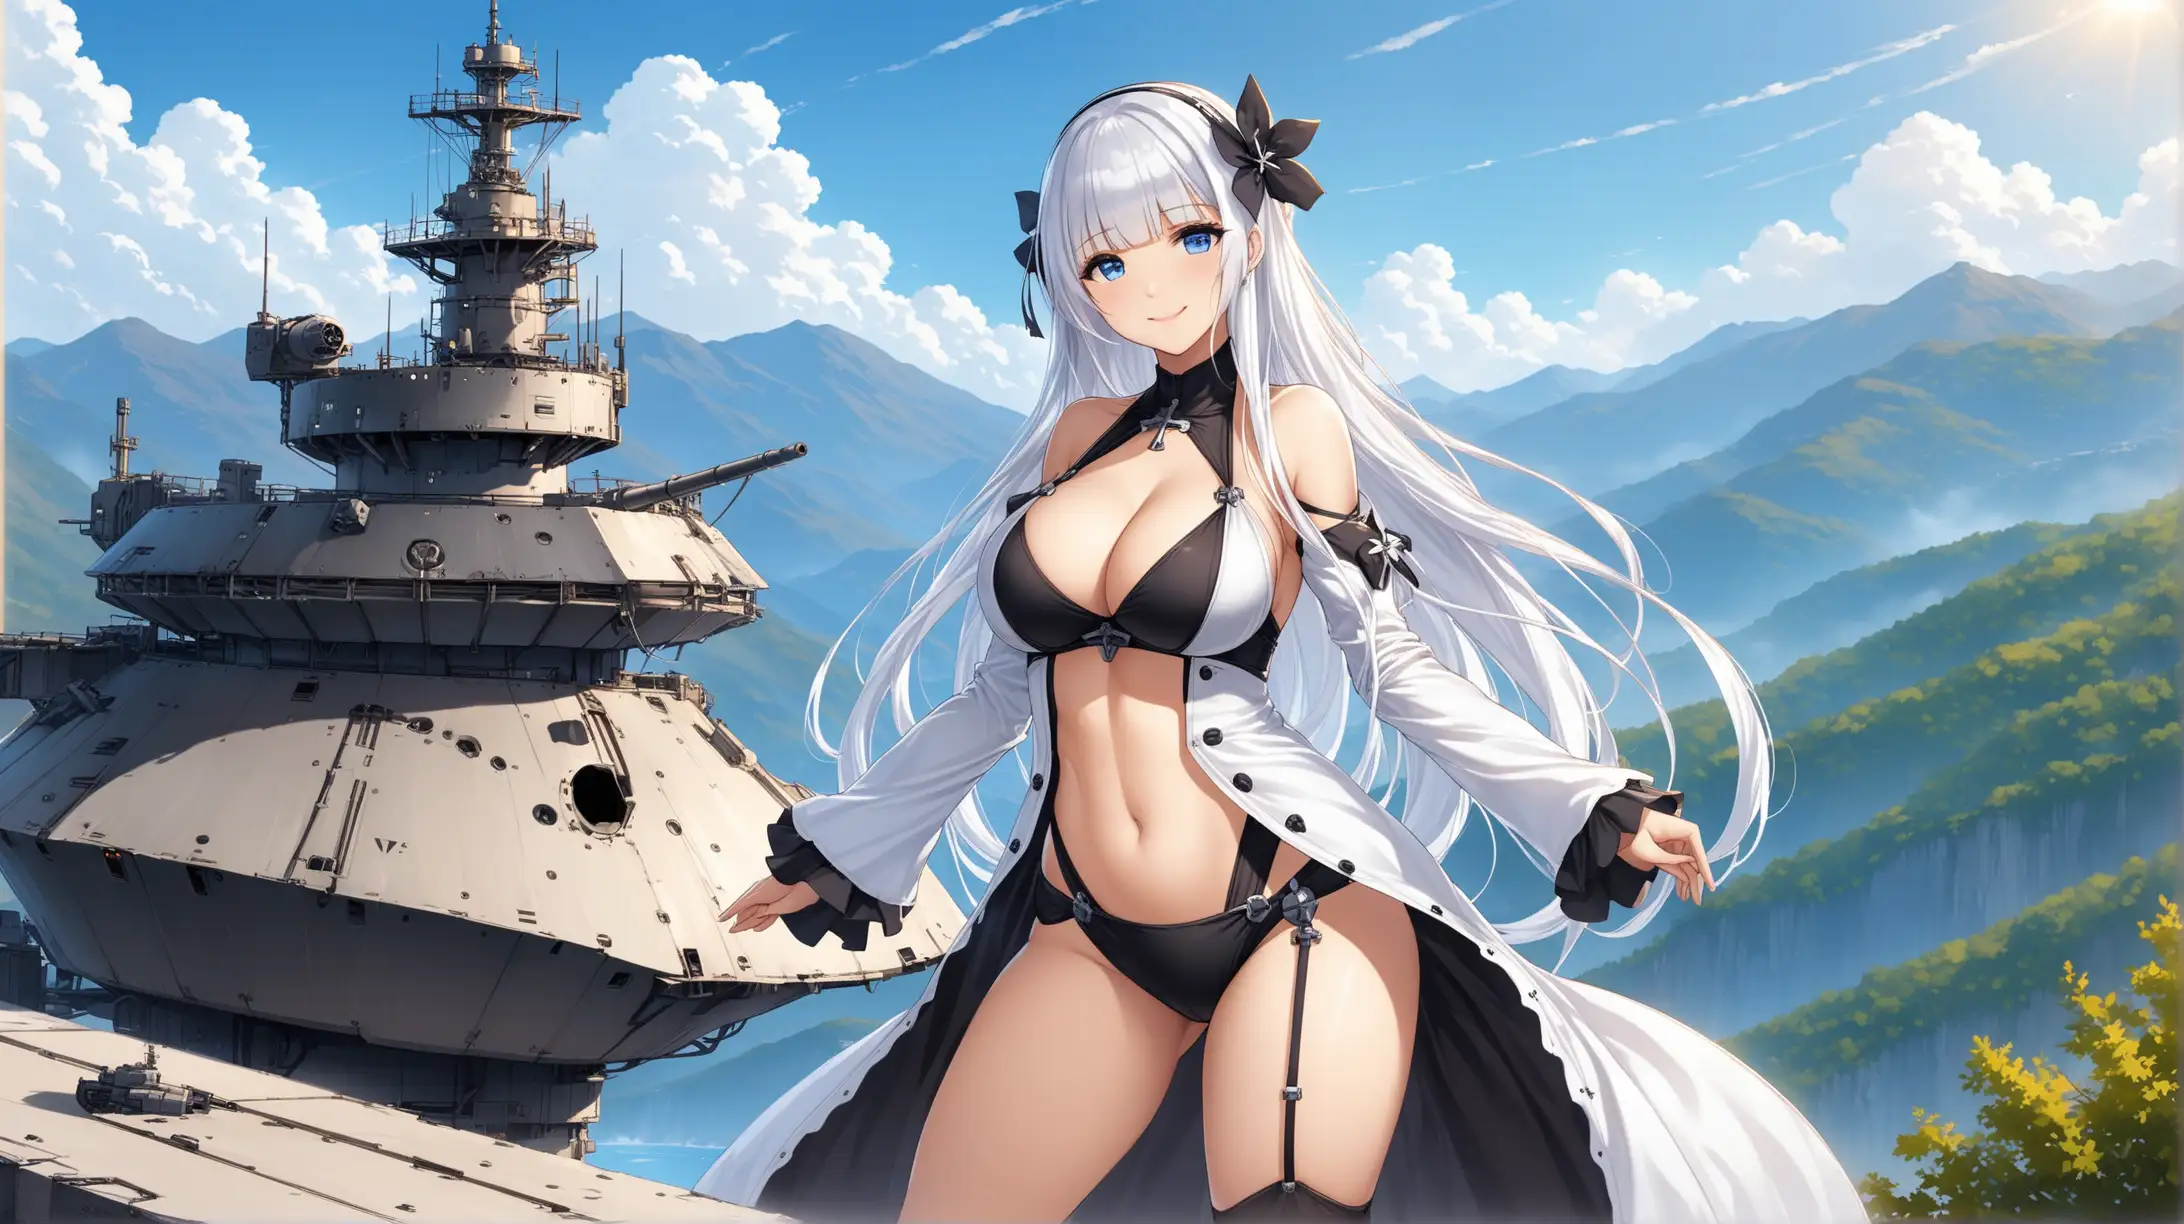 Draw the character Illustrious from Azur Lane, long hair, blue eyes, high quality, outdoors, natural lighting, in a seductive pose, wearing an outfit inspired from the Fallout series, smiling at the viewer